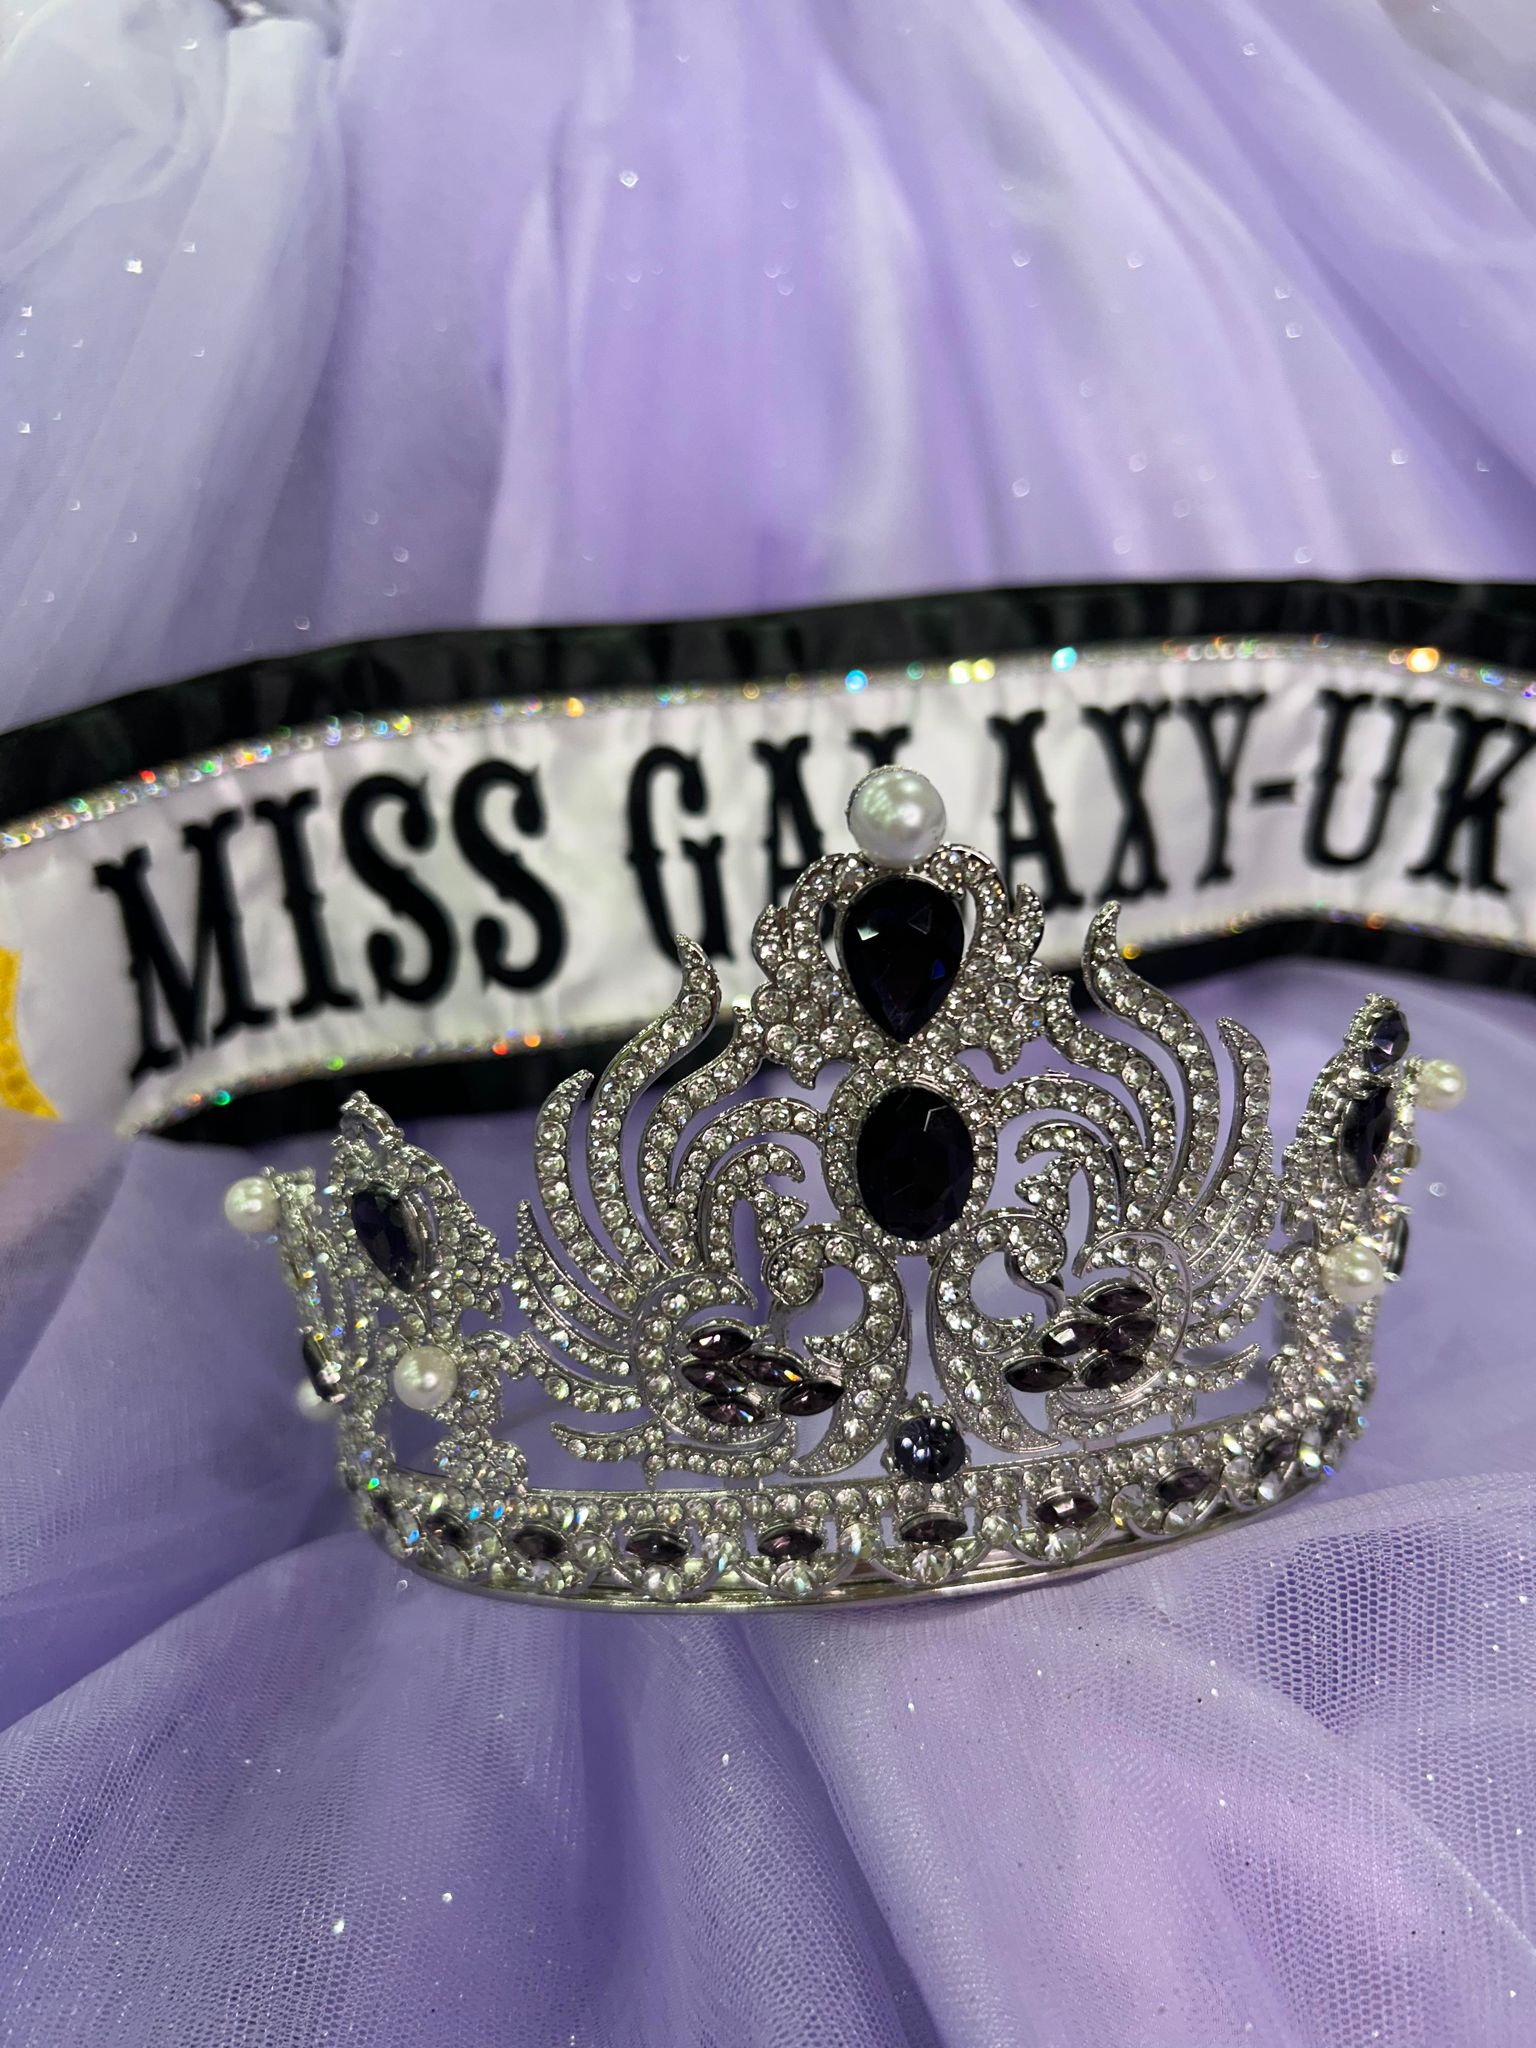 Delivery Alert! The UK Galaxy Pageant Crowns!